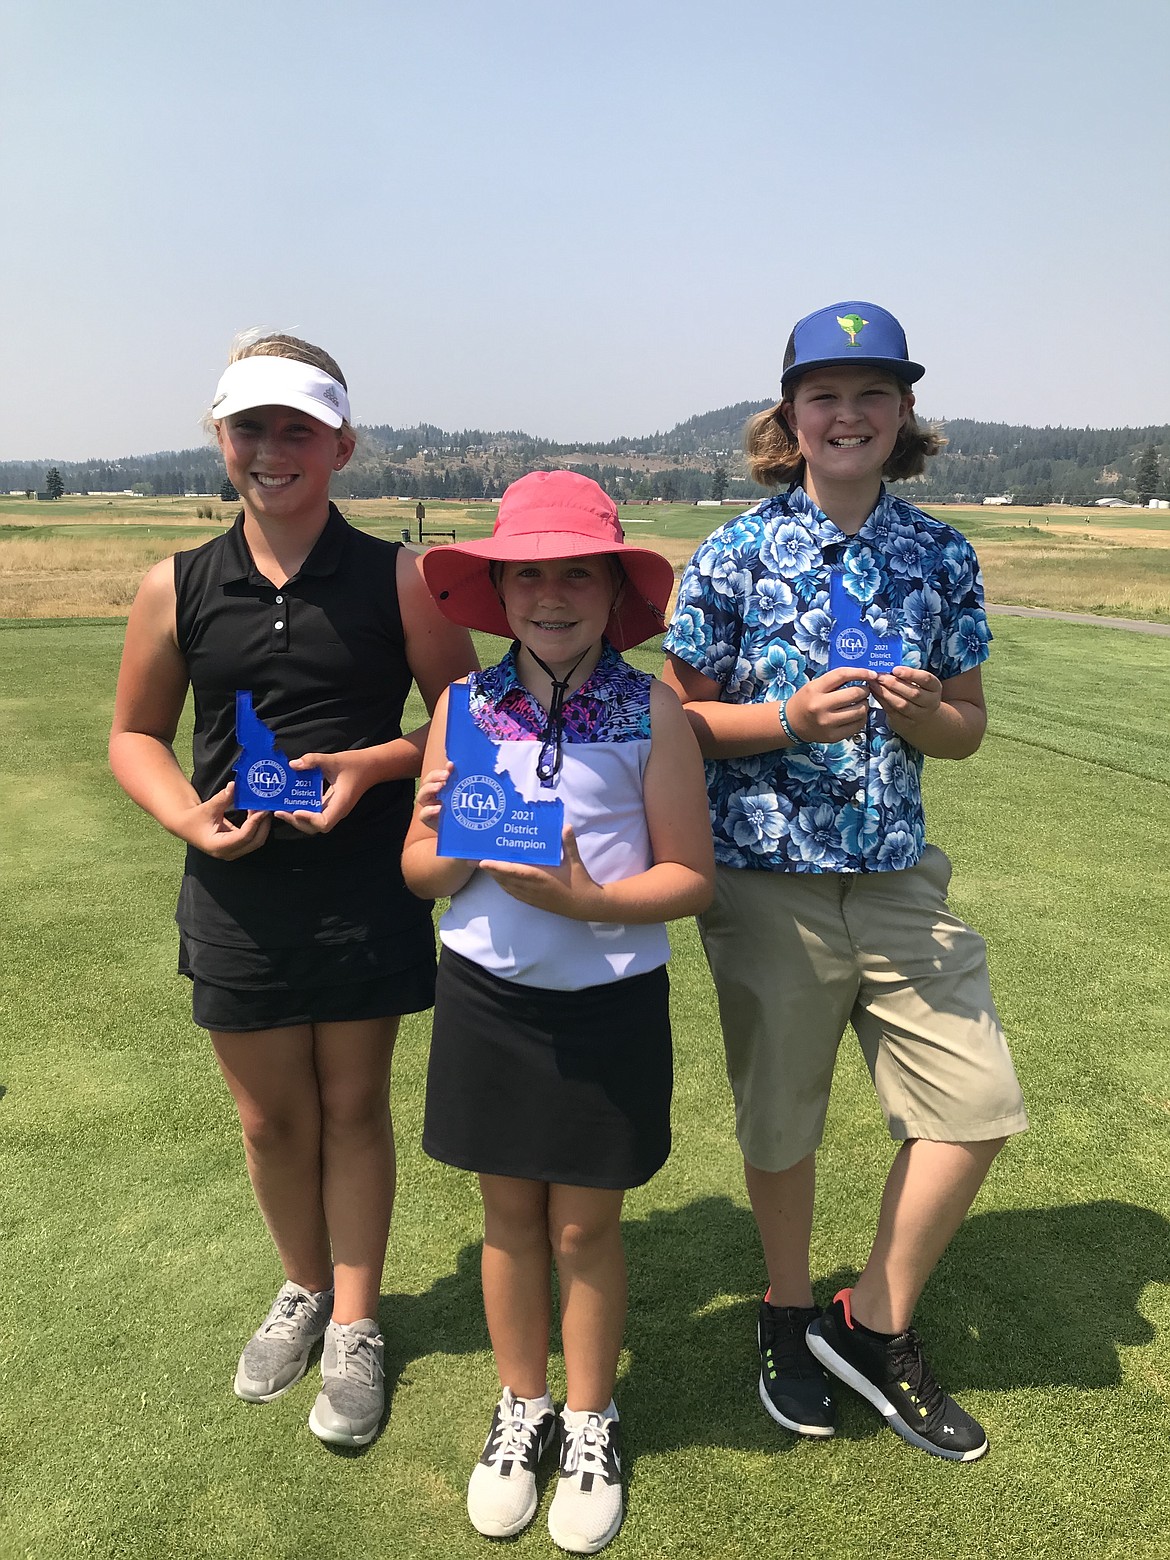 Courtesy photo
From left, Ella Wilson (Hayden Lake) took second place, Kamdyn Kelley (Lewiston) took first place and Jossetta Williams (Hayden Lake) took third place in the girls 10-12 age group at the Idaho Golf Association district championships Monday and Tuesday at The Links Golf Club in Post Falls. All these girls will compete in the state championship at Canyon Springs Golf Course in Twin Falls.